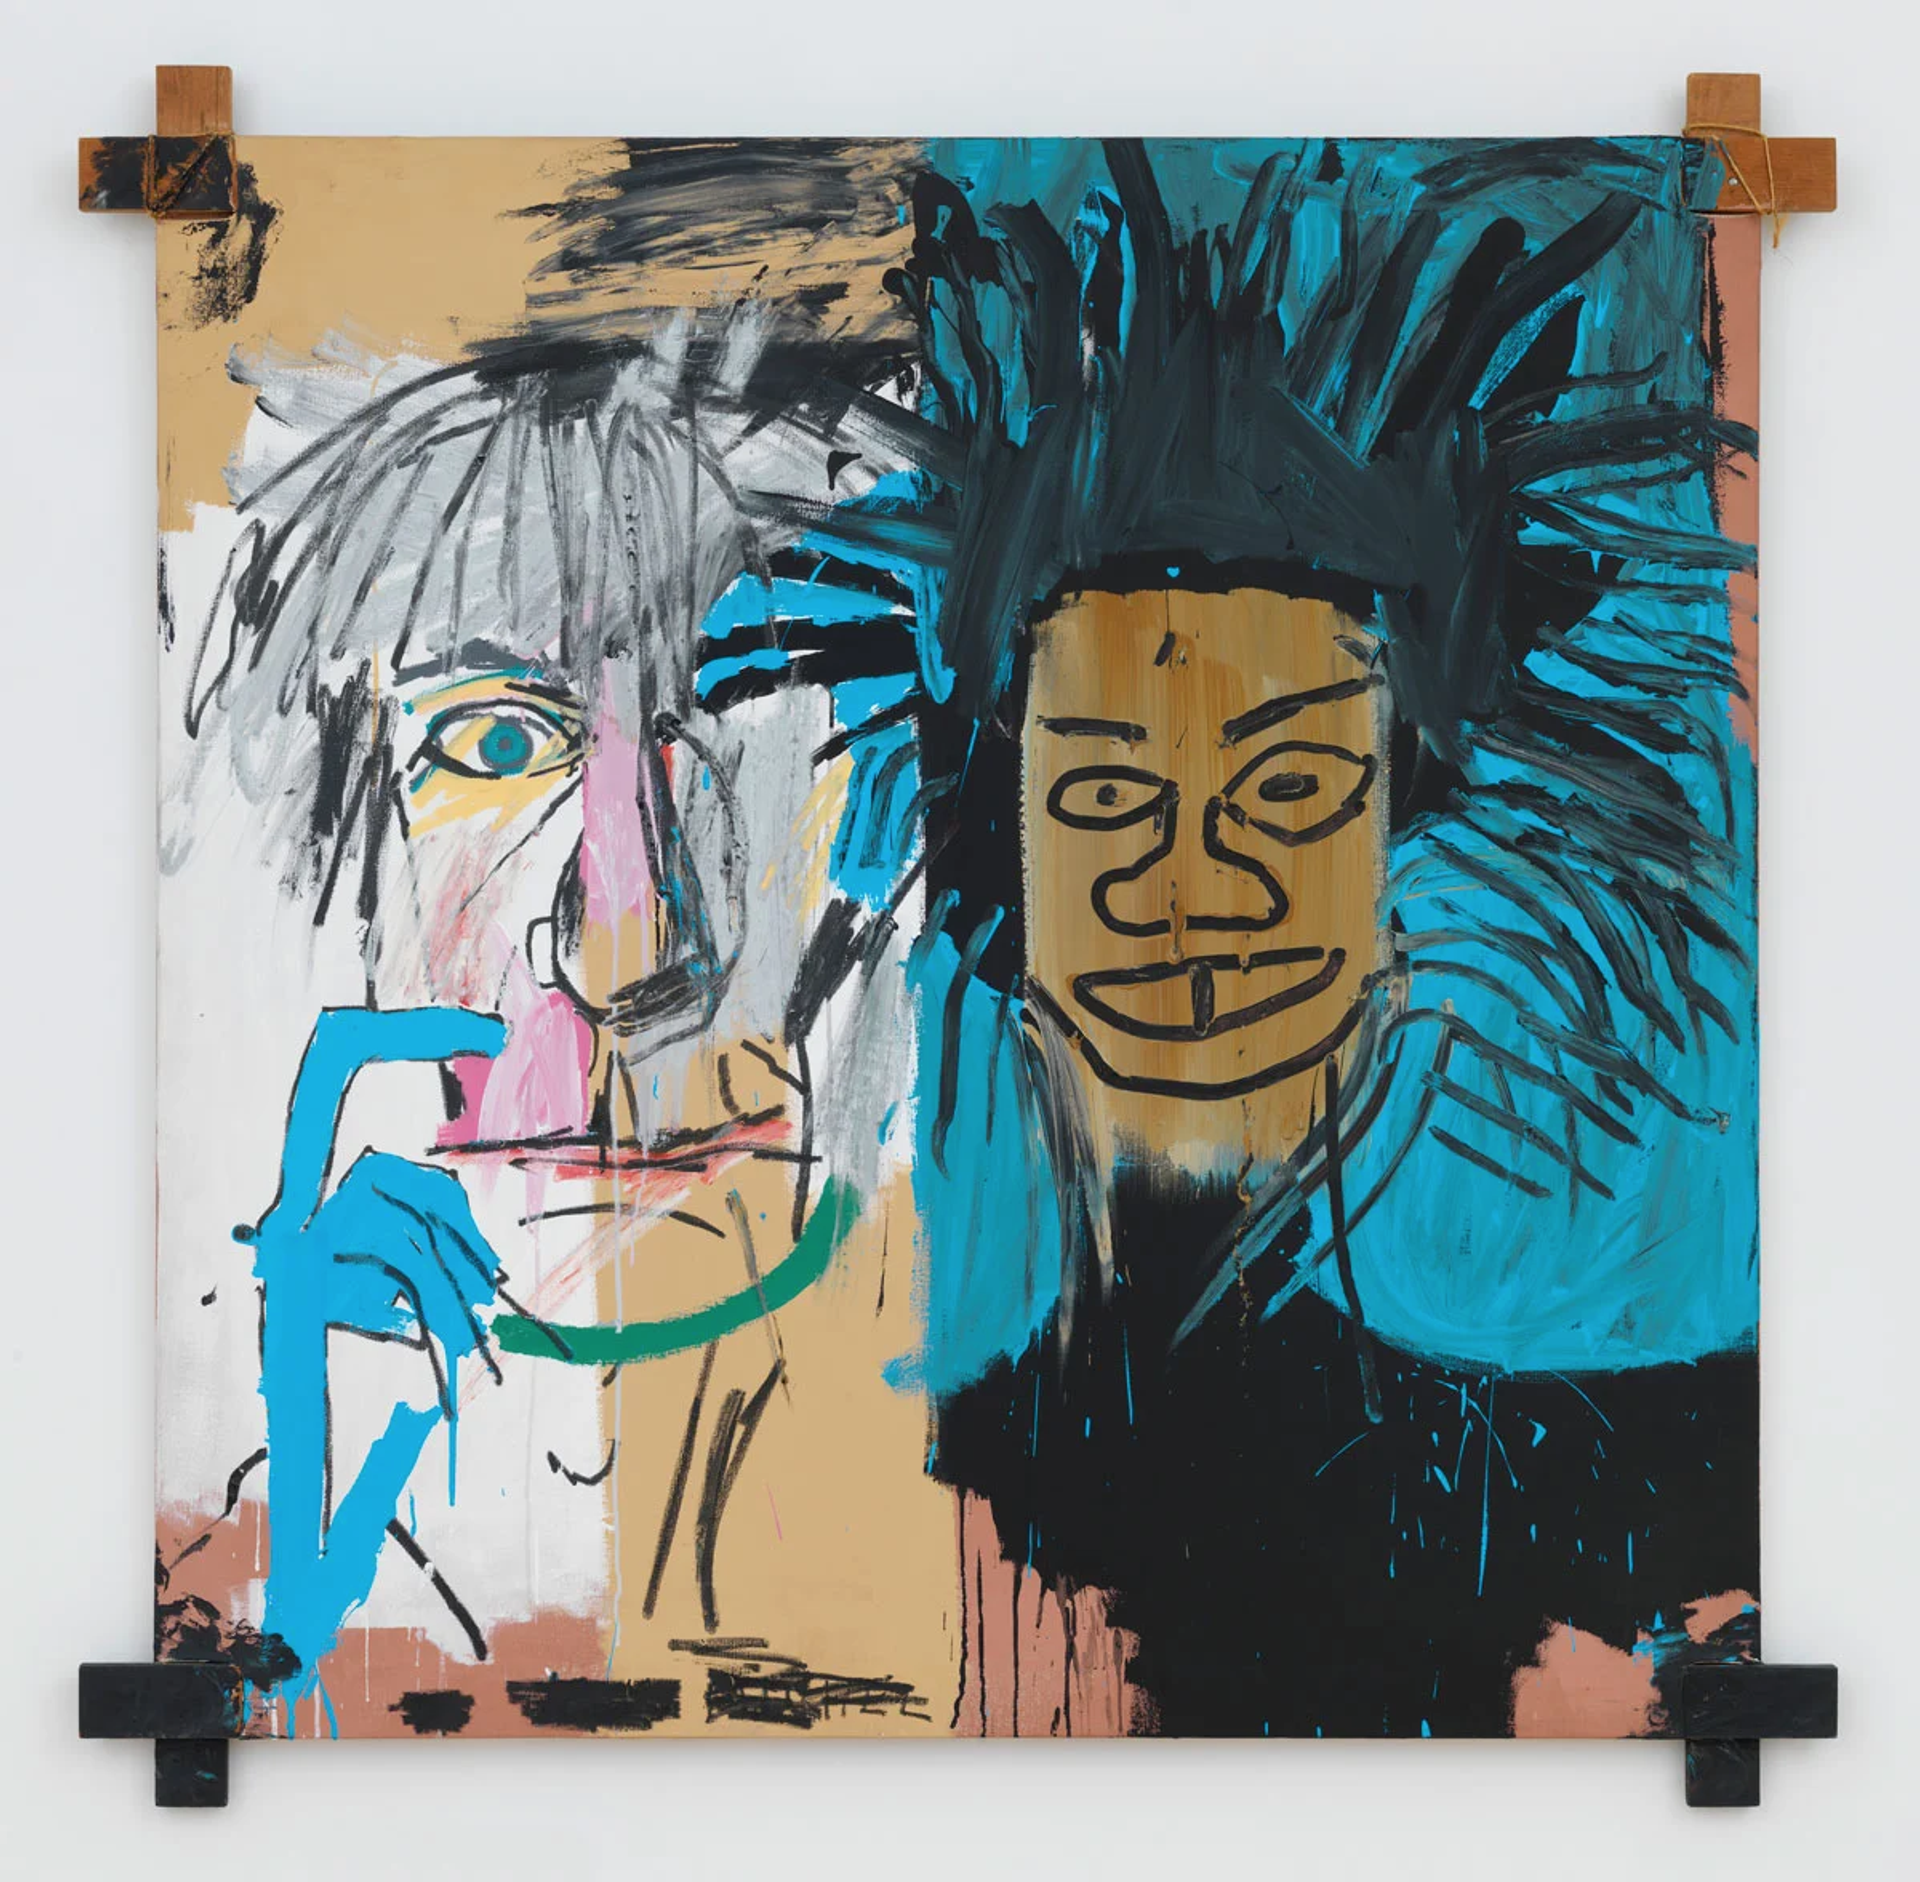 Two heads painted side by side against a white and blue background